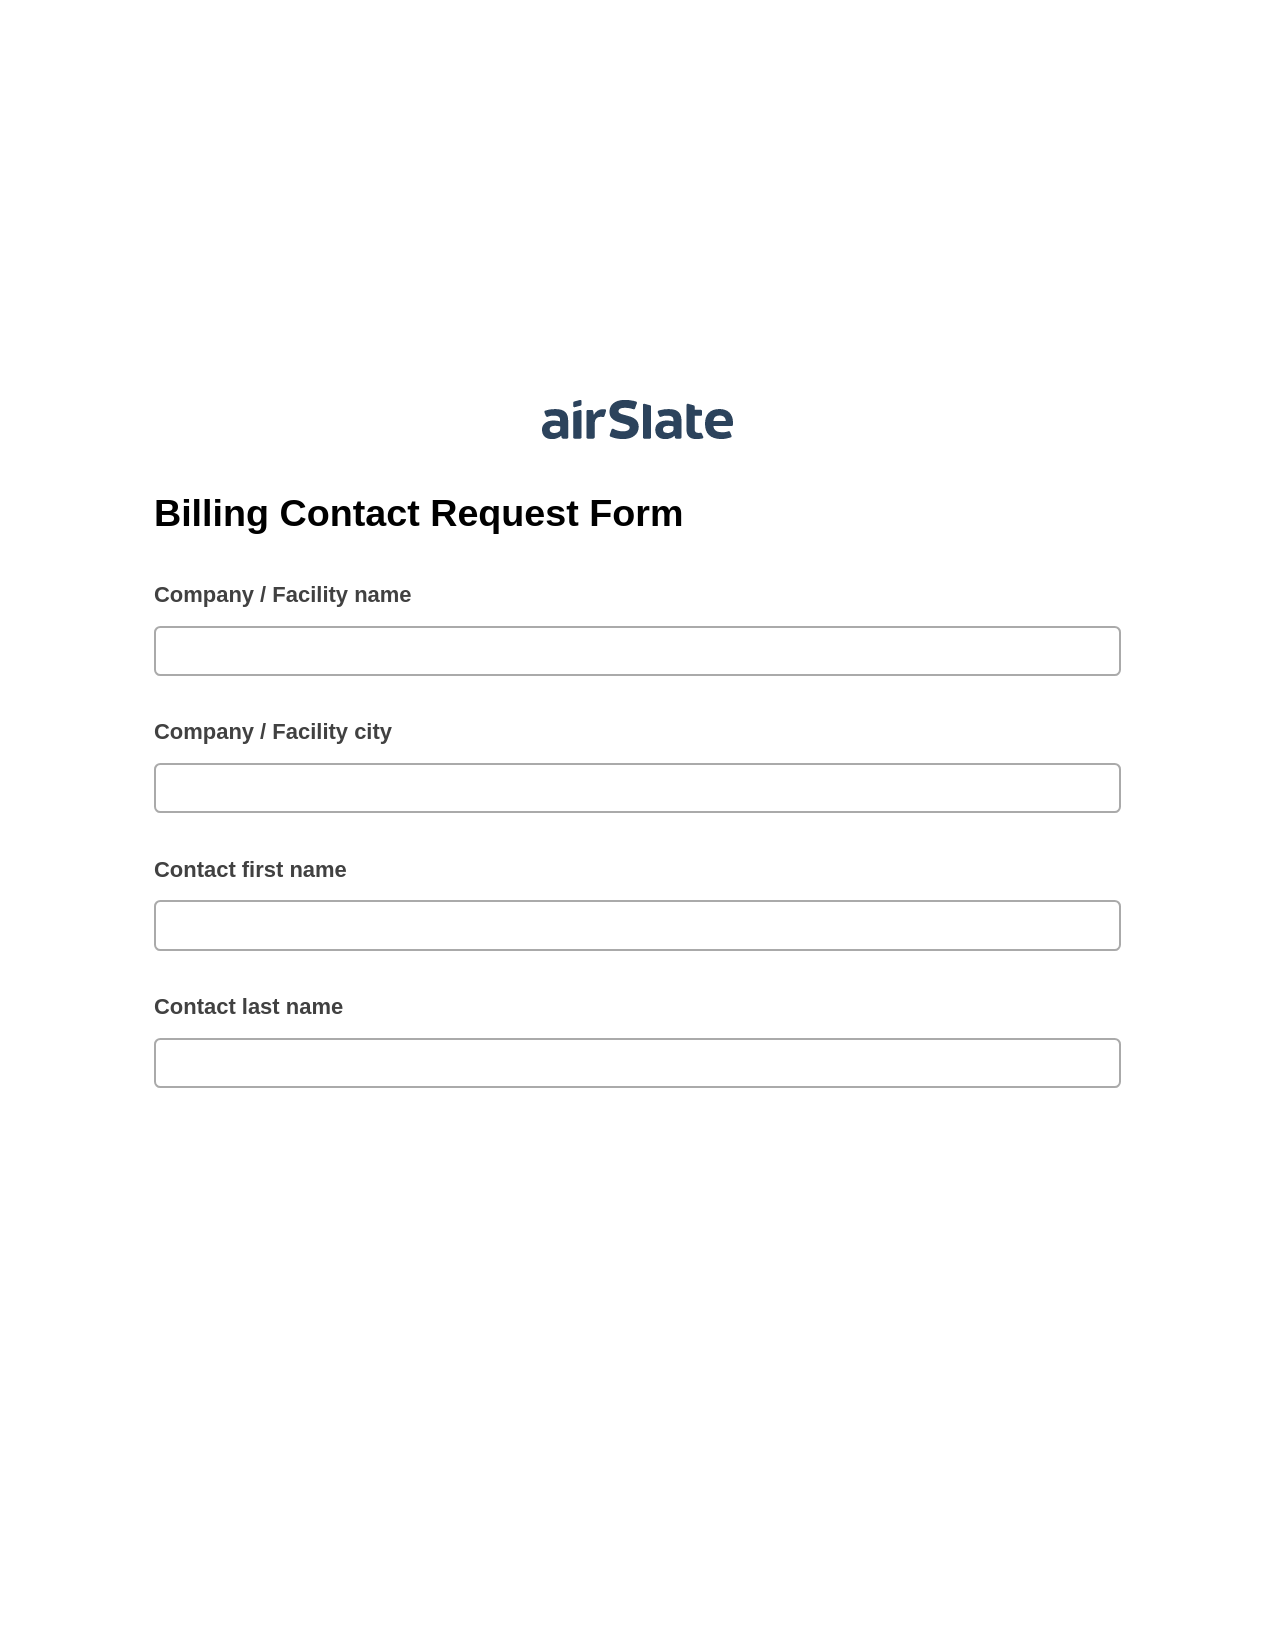 Multirole Billing Contact Request Form Pre-fill from another Slate Bot, Hide Signatures Bot, Google Drive Bot